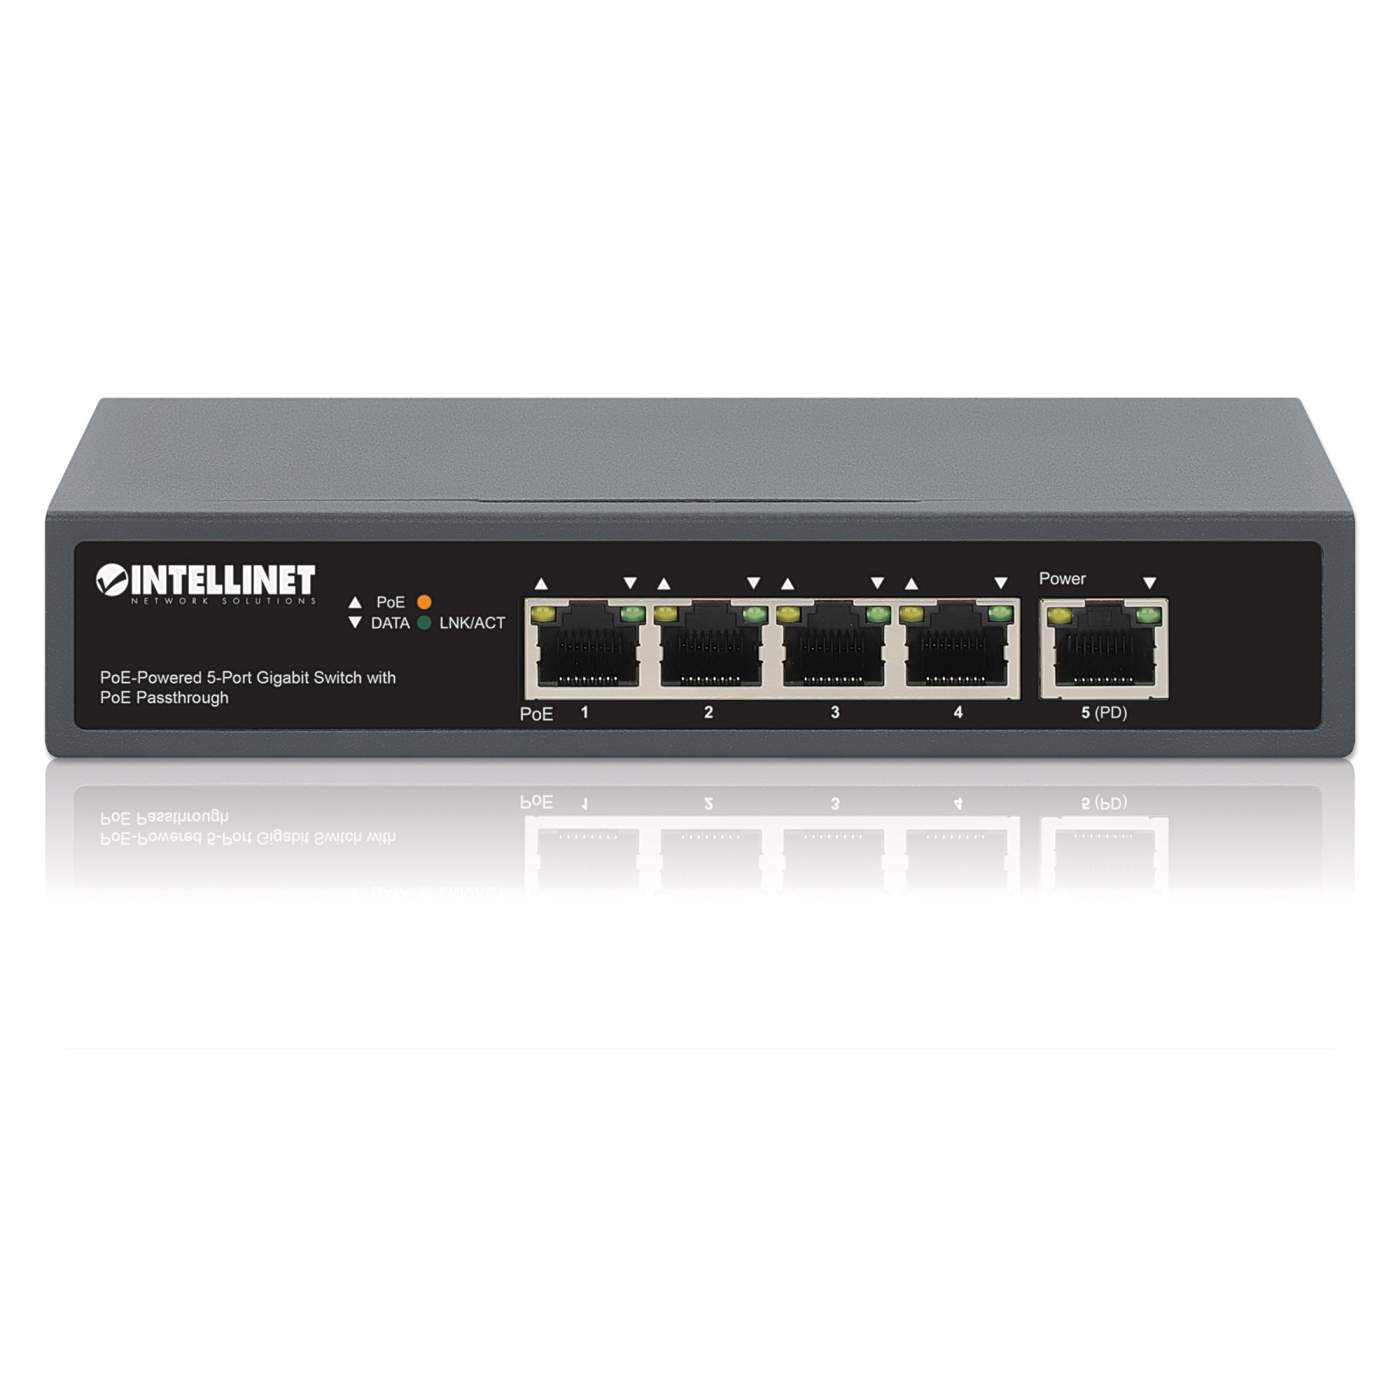 PoE-Powered 5-Port Gigabit Switch with PoE Passthrough Image 6